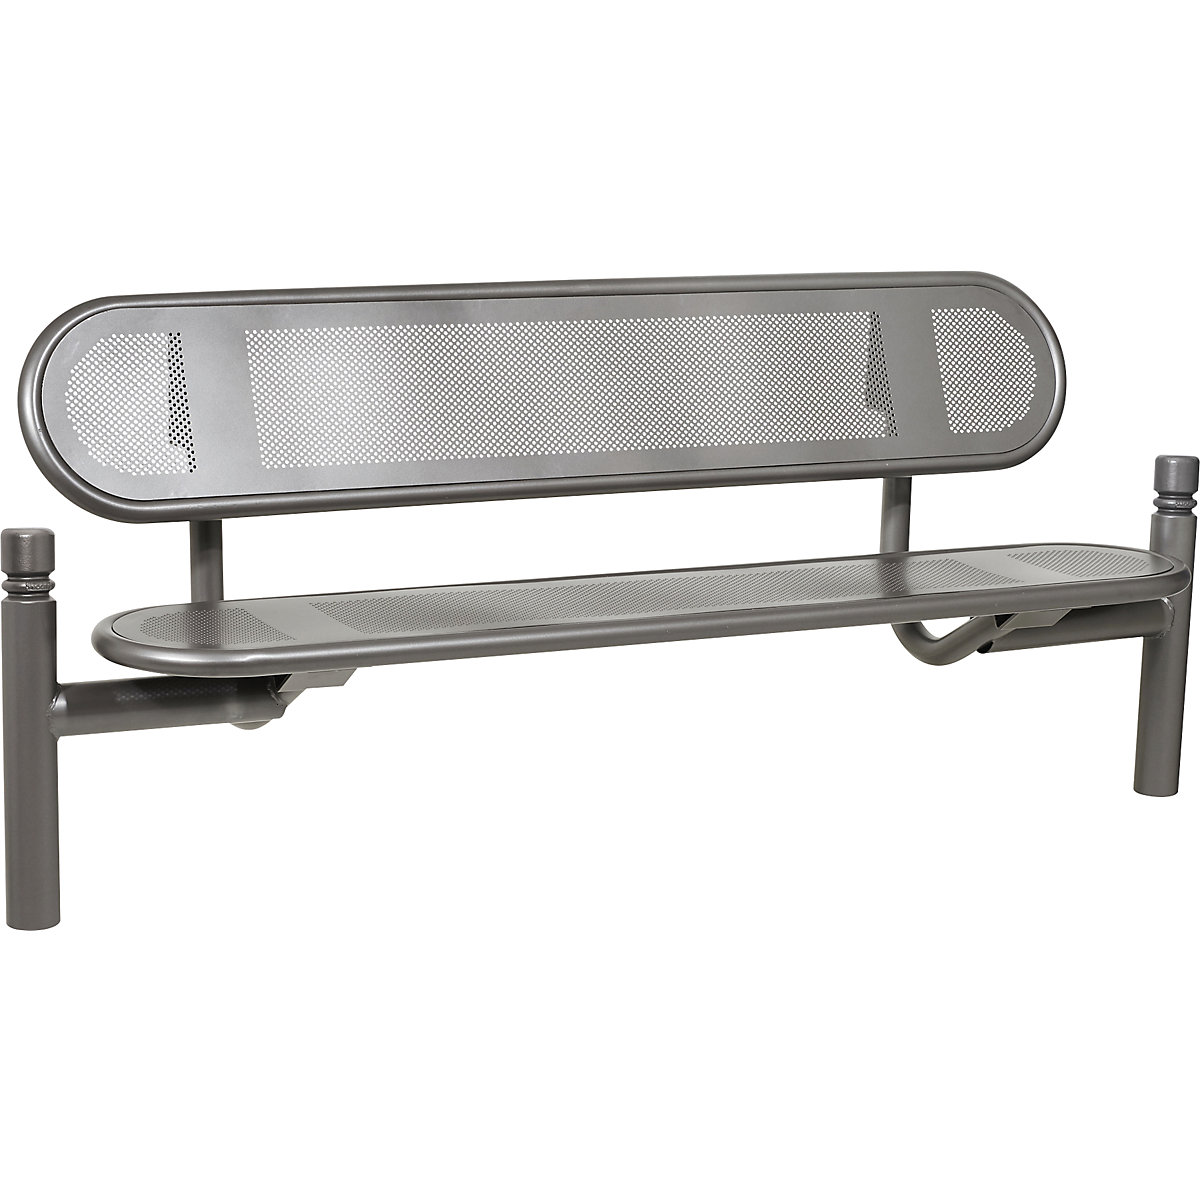 ESTORIL bench – PROCITY, city, length 1800 mm, charcoal, with back rest-4